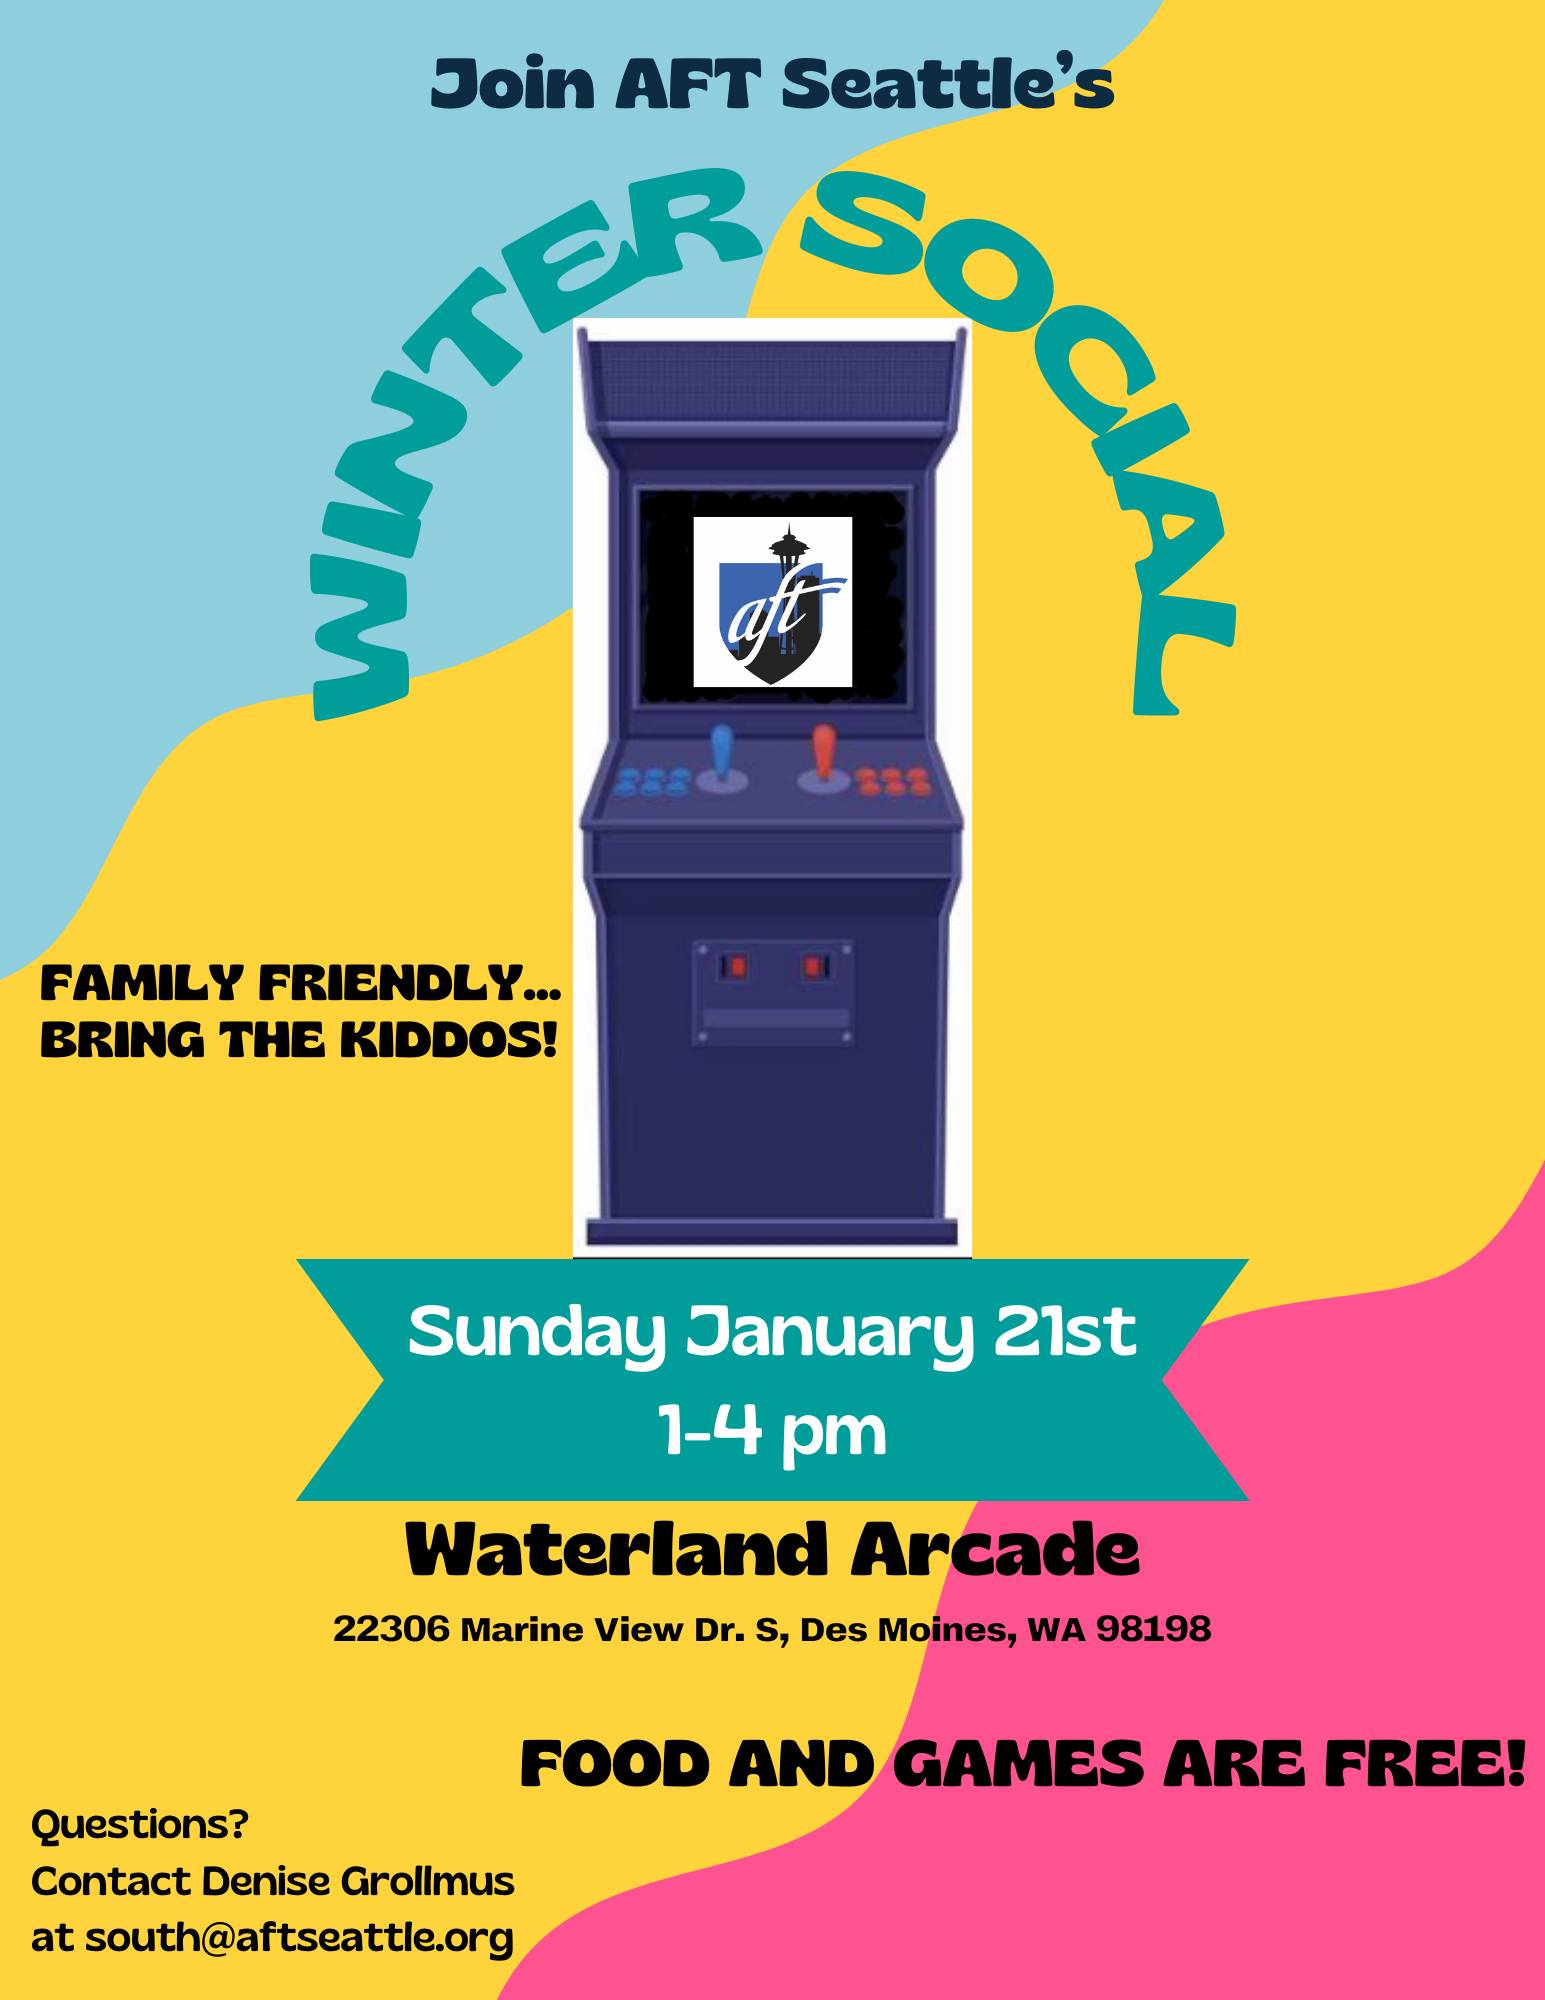 Join AFT Seattle's Winter Social at Waterland Arcade on January 21st, 1-4 pm. Food and games are free!